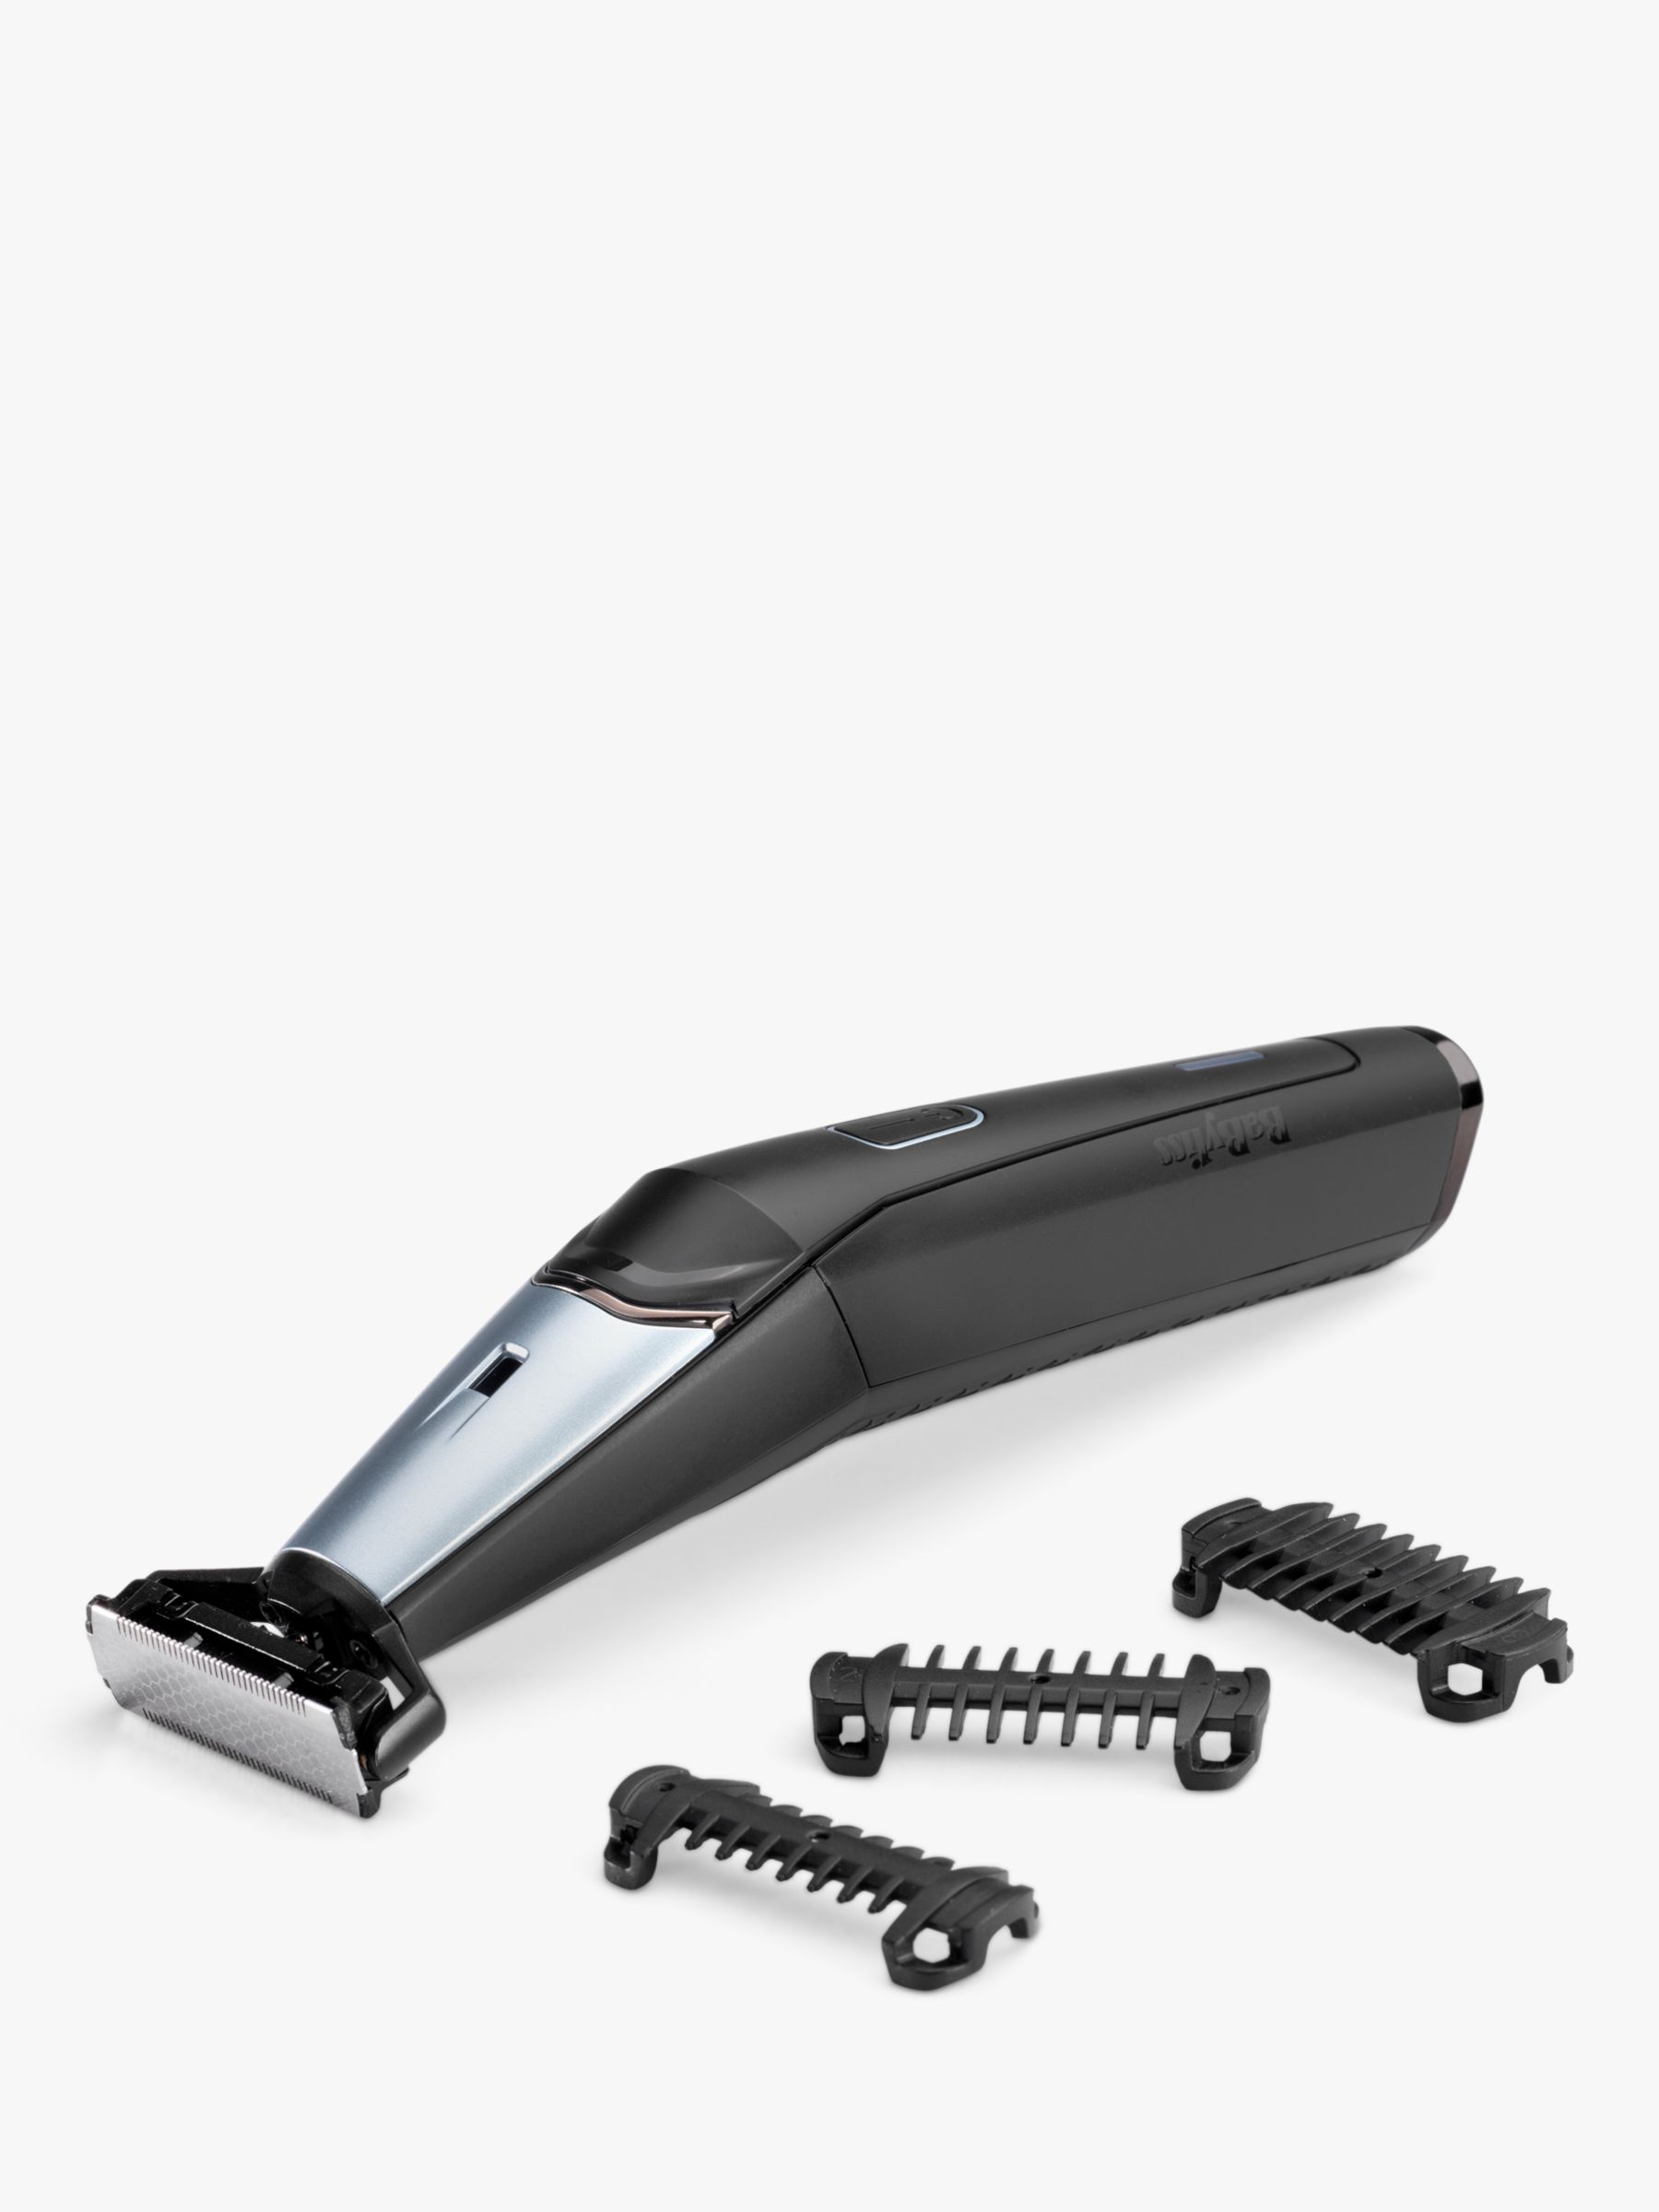 BaByliss Triple S Stubble, Shadow, Shave & Beard Trimmer, Black